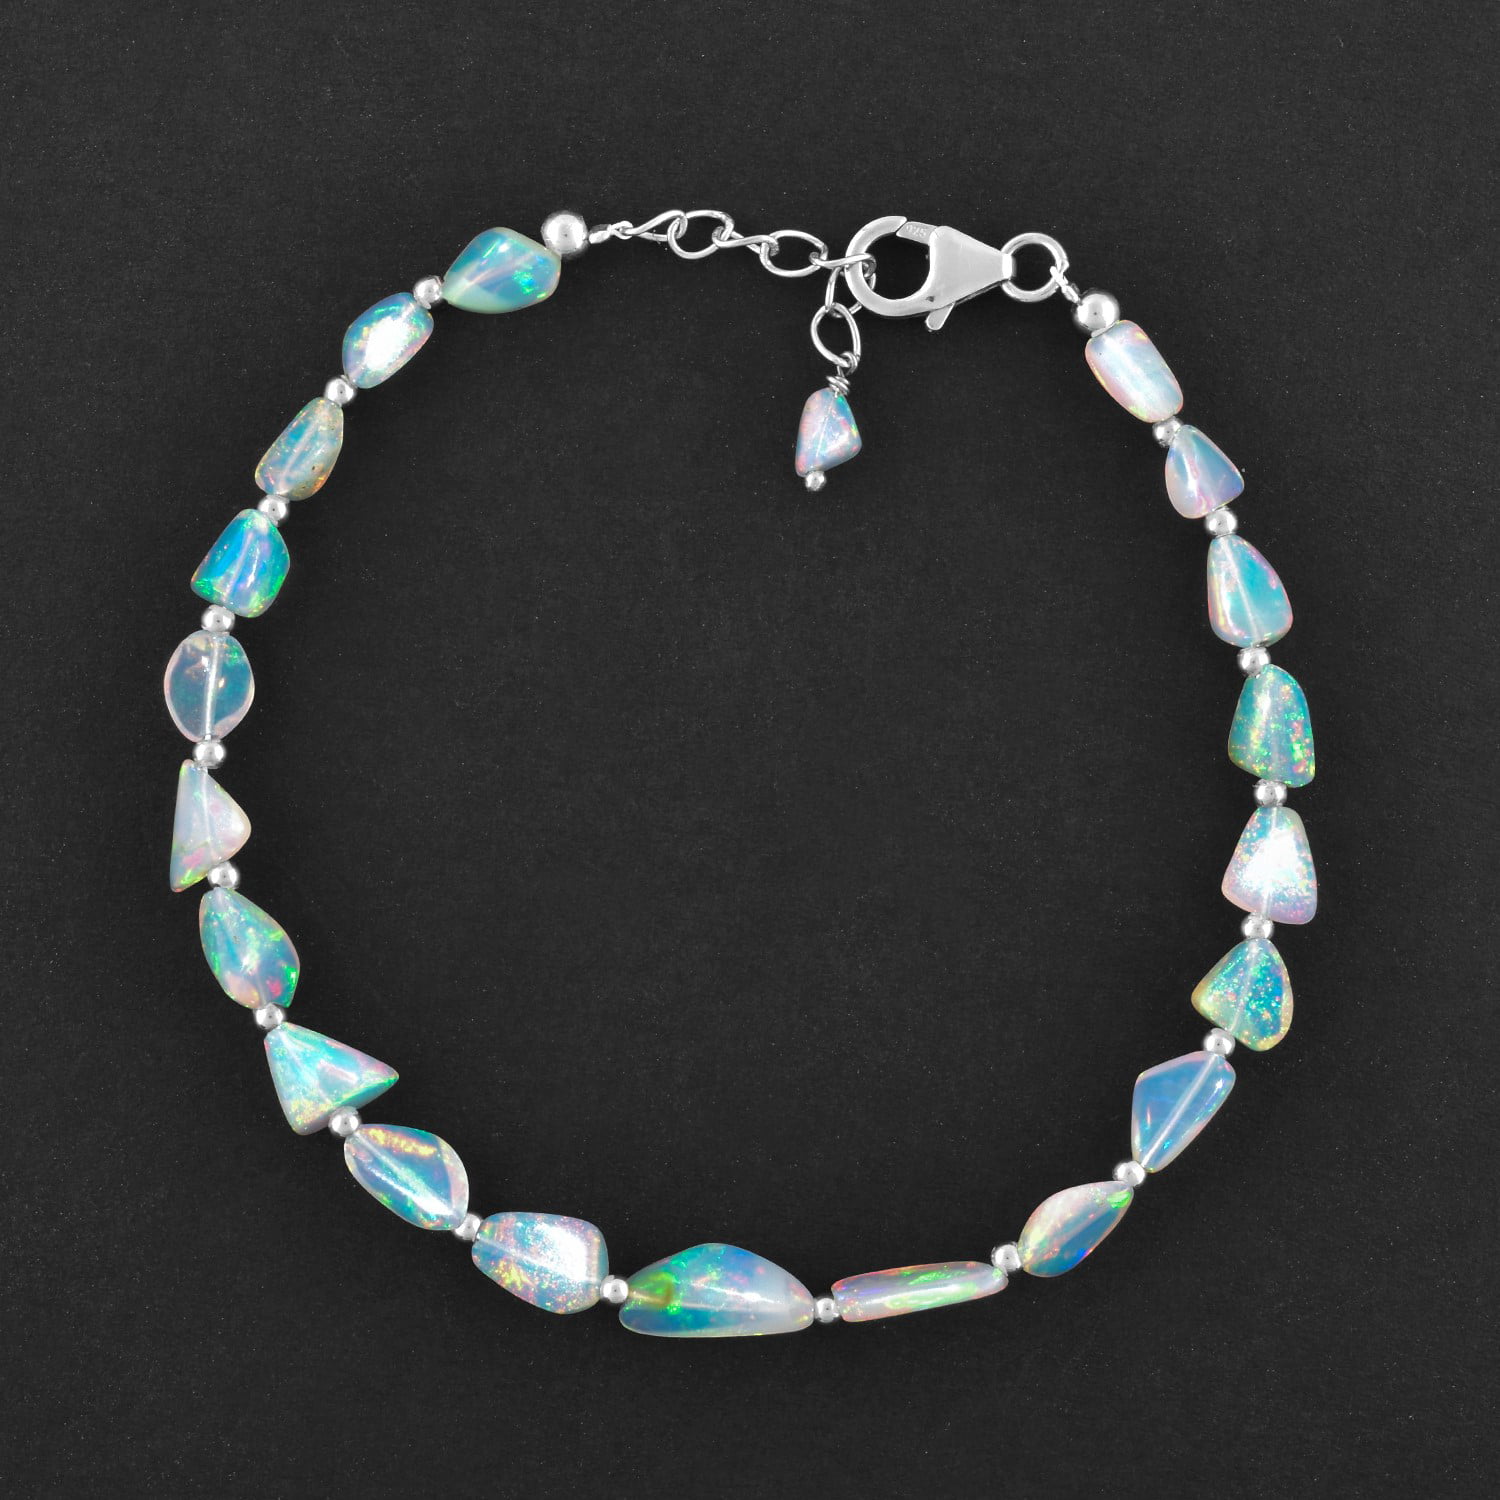 Healing Chakra Crystals Birthstone Jewelry Rhodium Plating 925 Sterling Silver 8 Inchs Gift for Her PrincetonGems Real Turquoise Stone Crystal Beads Bangle Bracelet For Women 